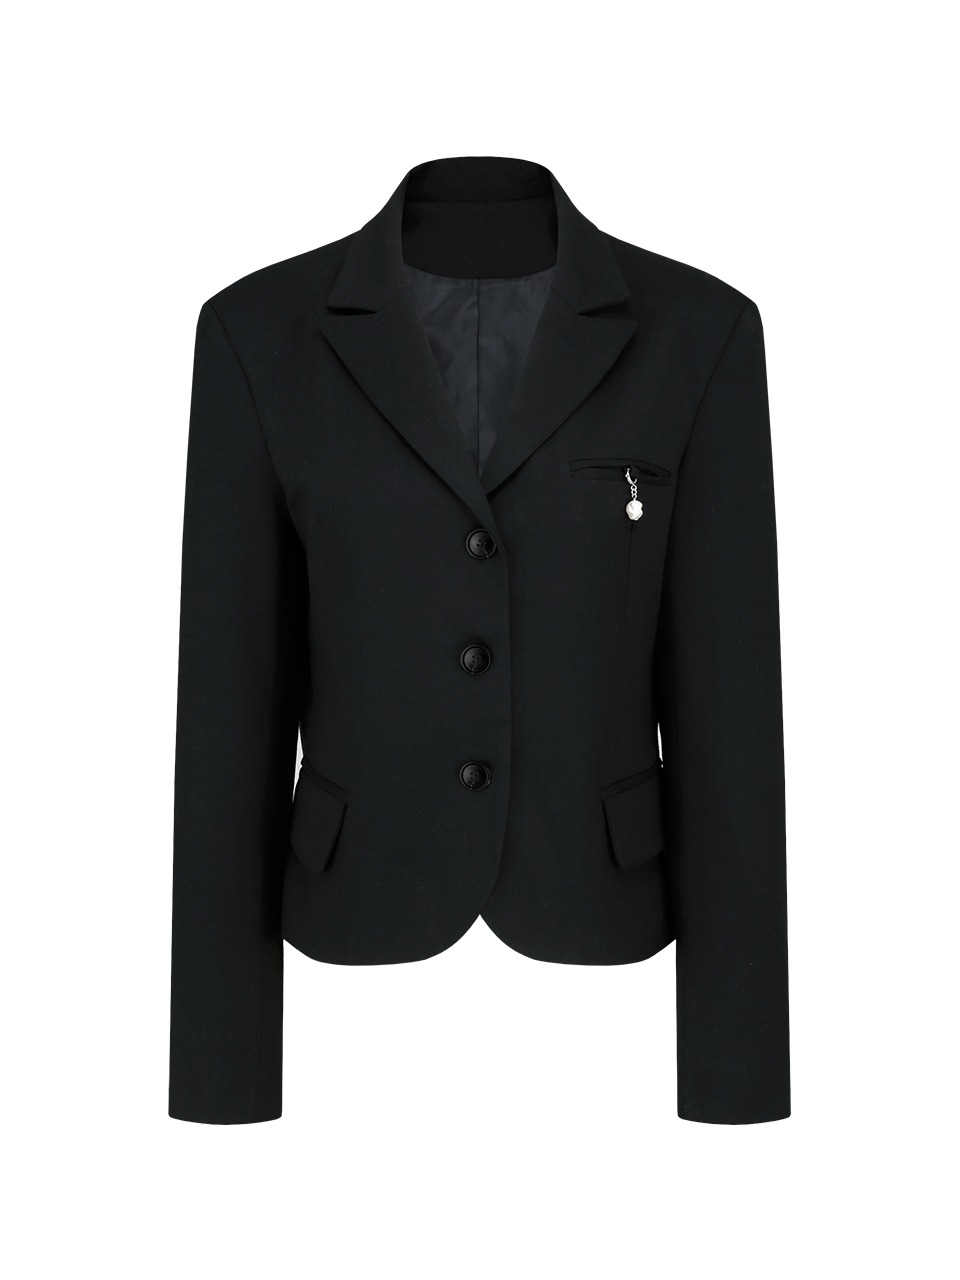 PEARL POINT TAILOR JACKET